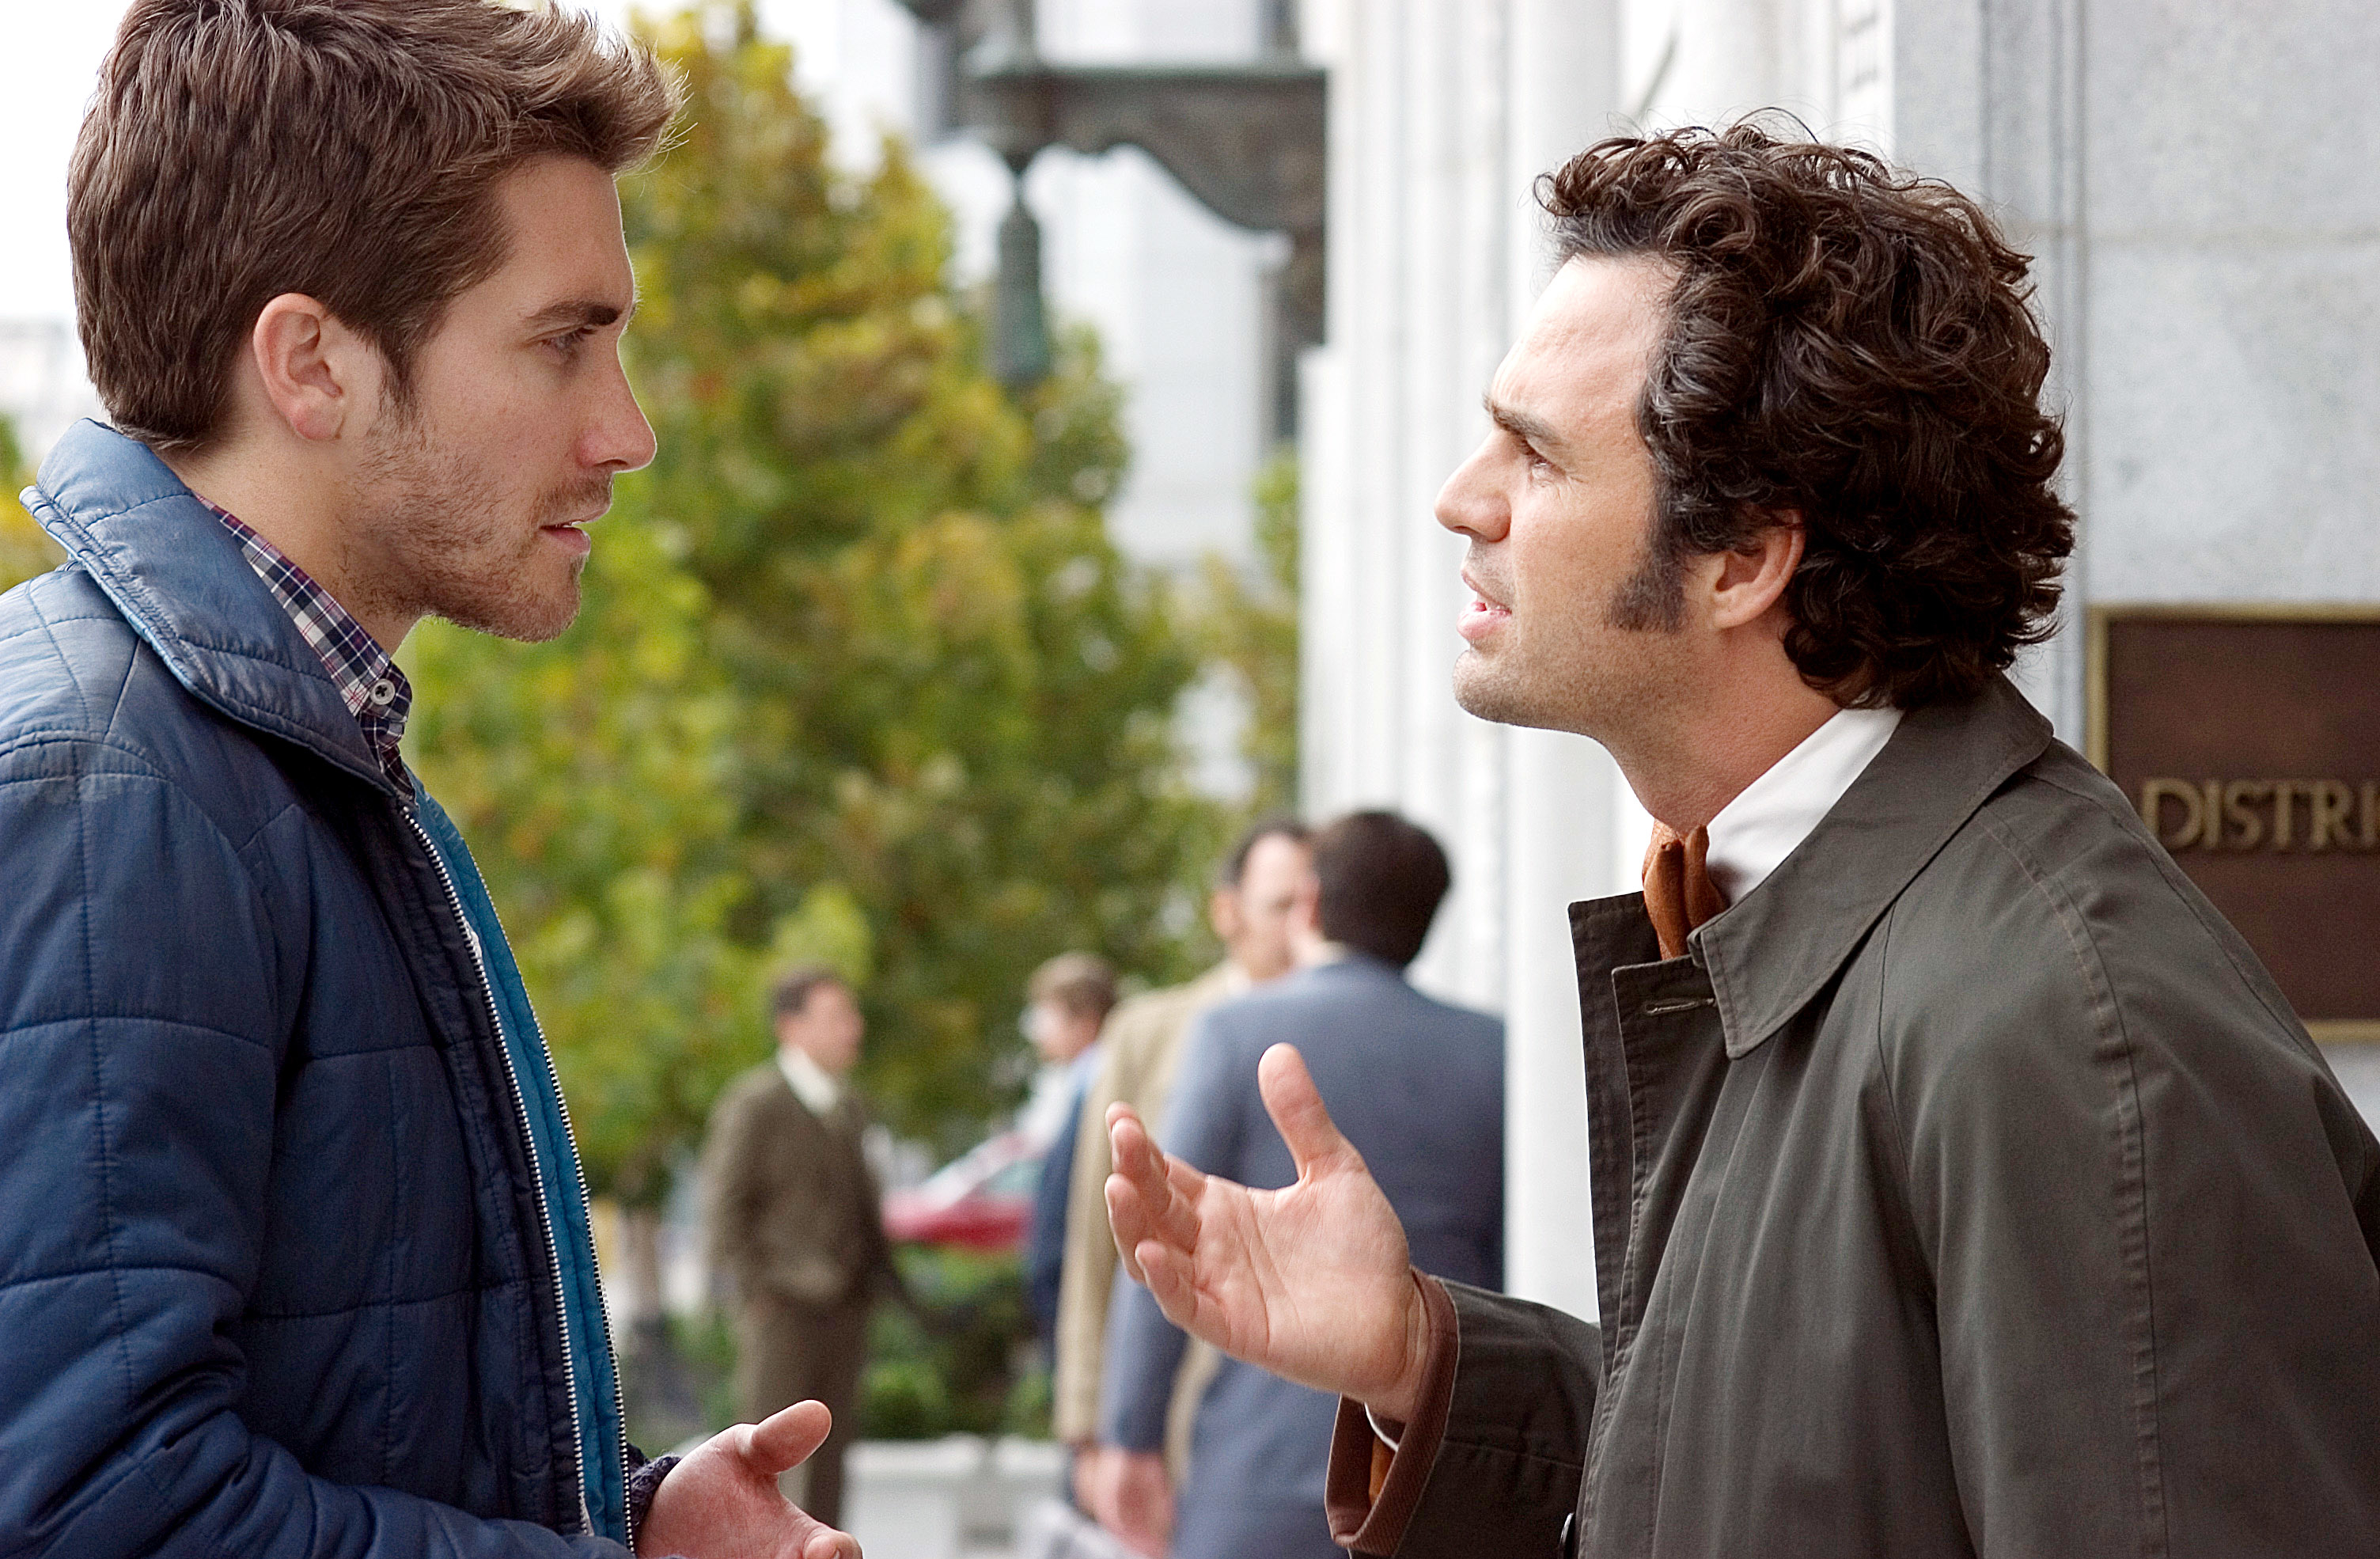 Two men in casual jackets have a conversation on a city street